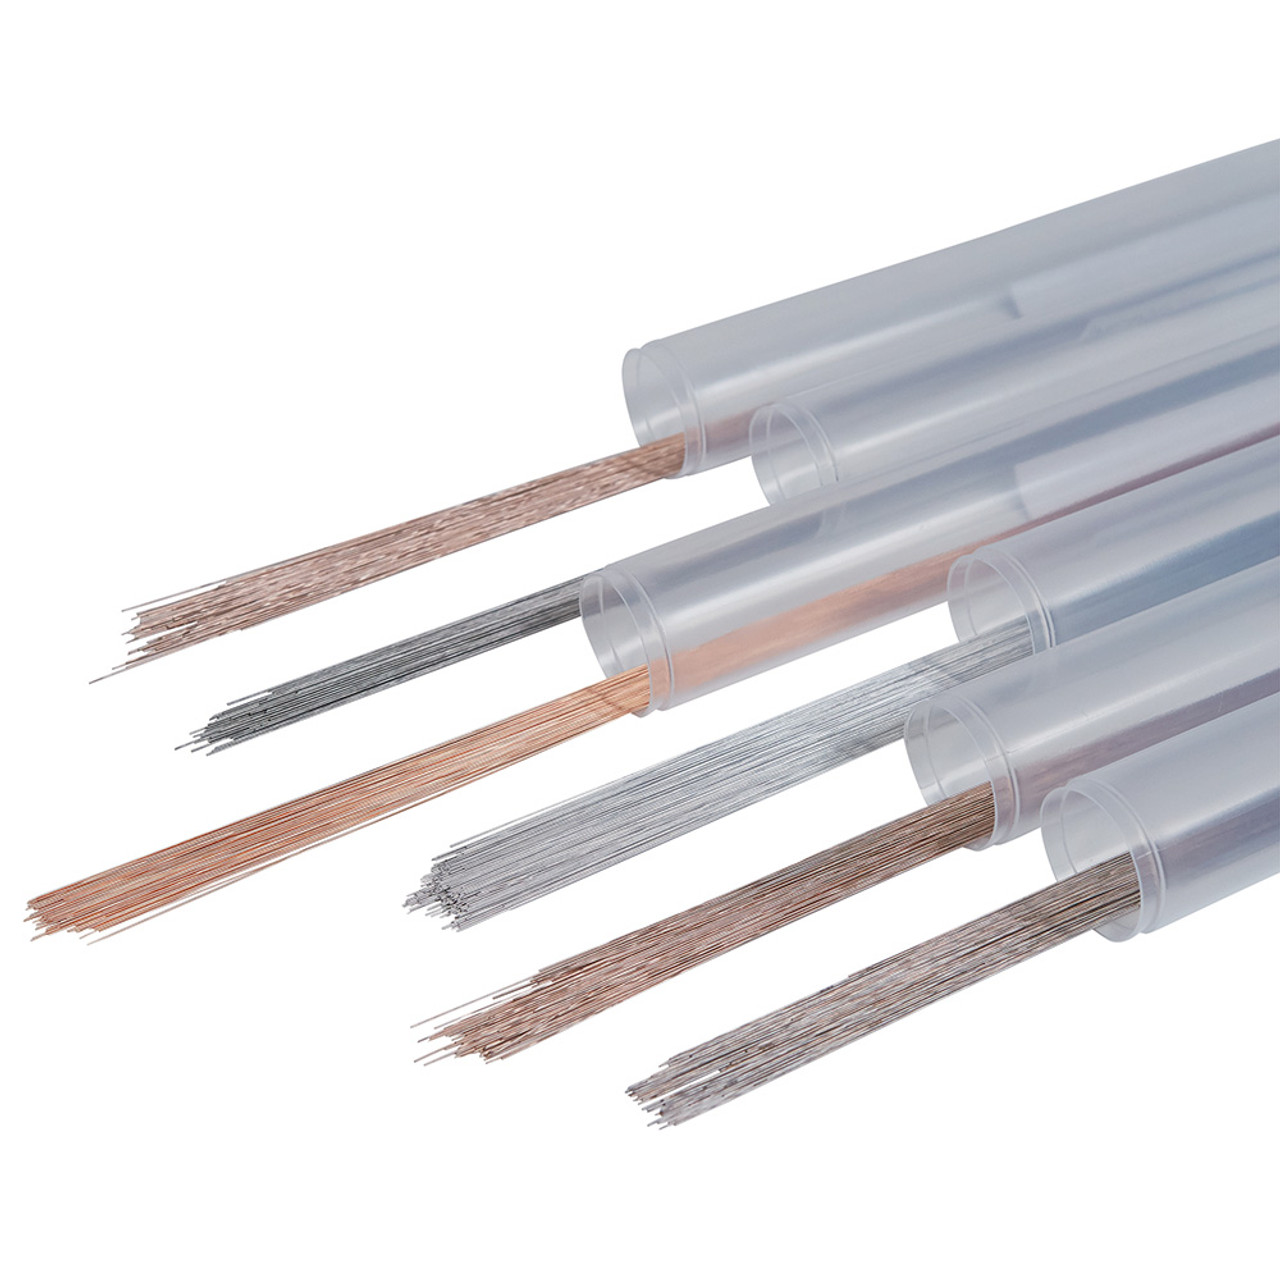 Laser Welding Wires - P-20M,  0.5mm pkg. of 25 grams = approx. 50 wires